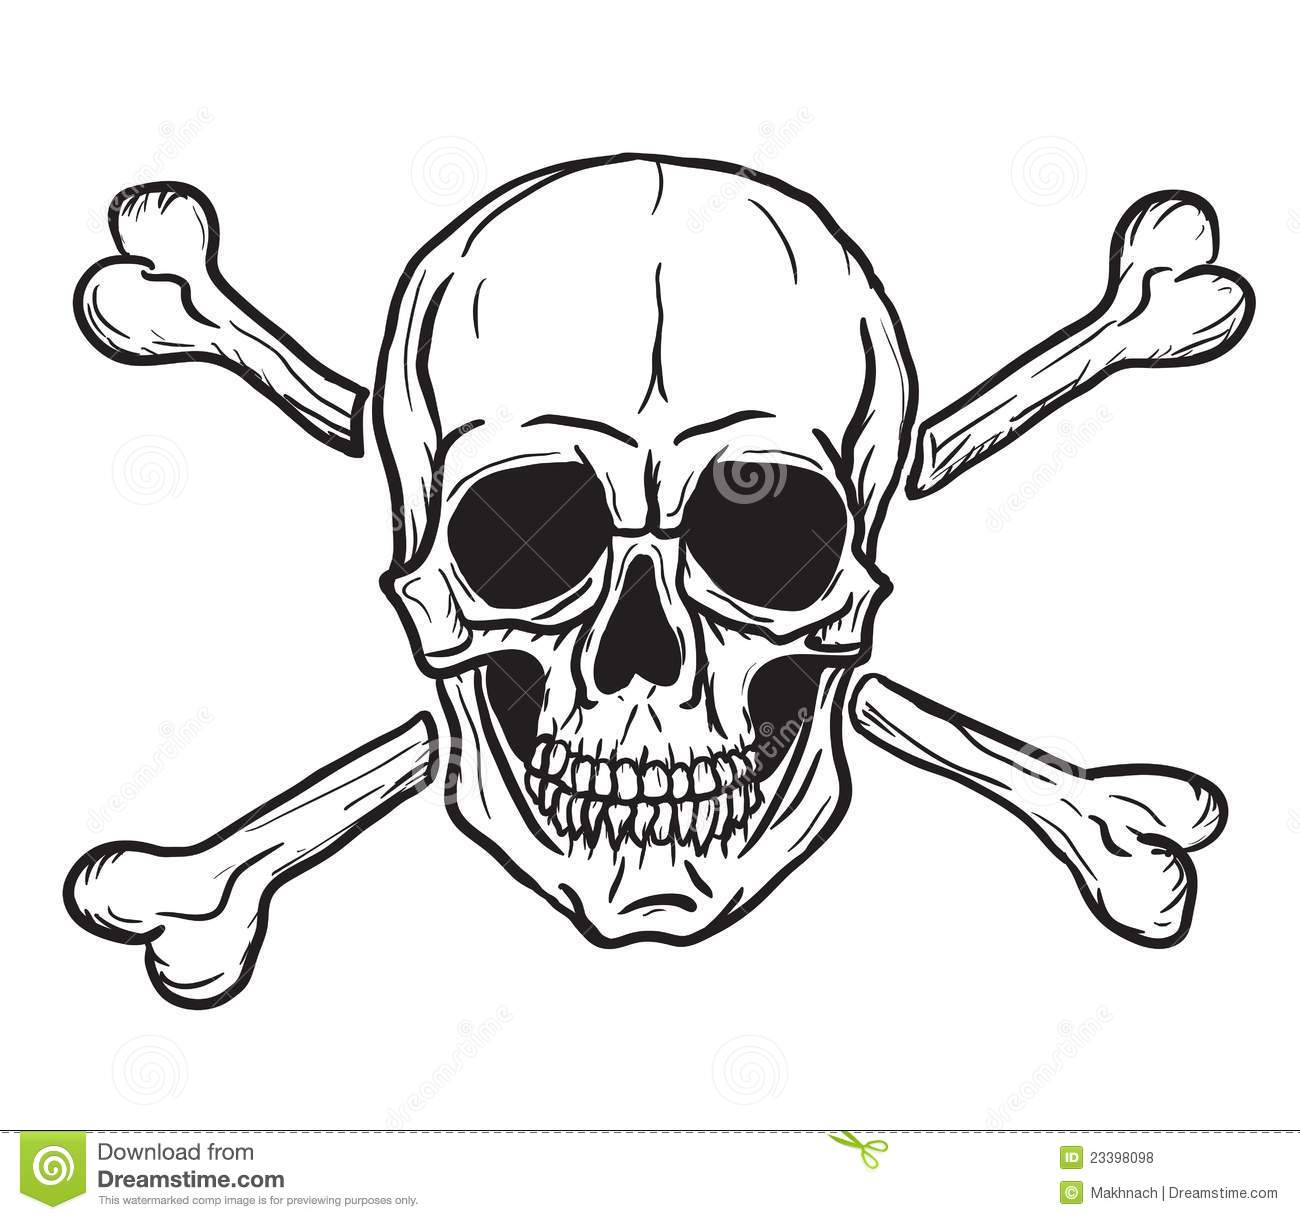 Skull And Crossbones Isolated Over White Background